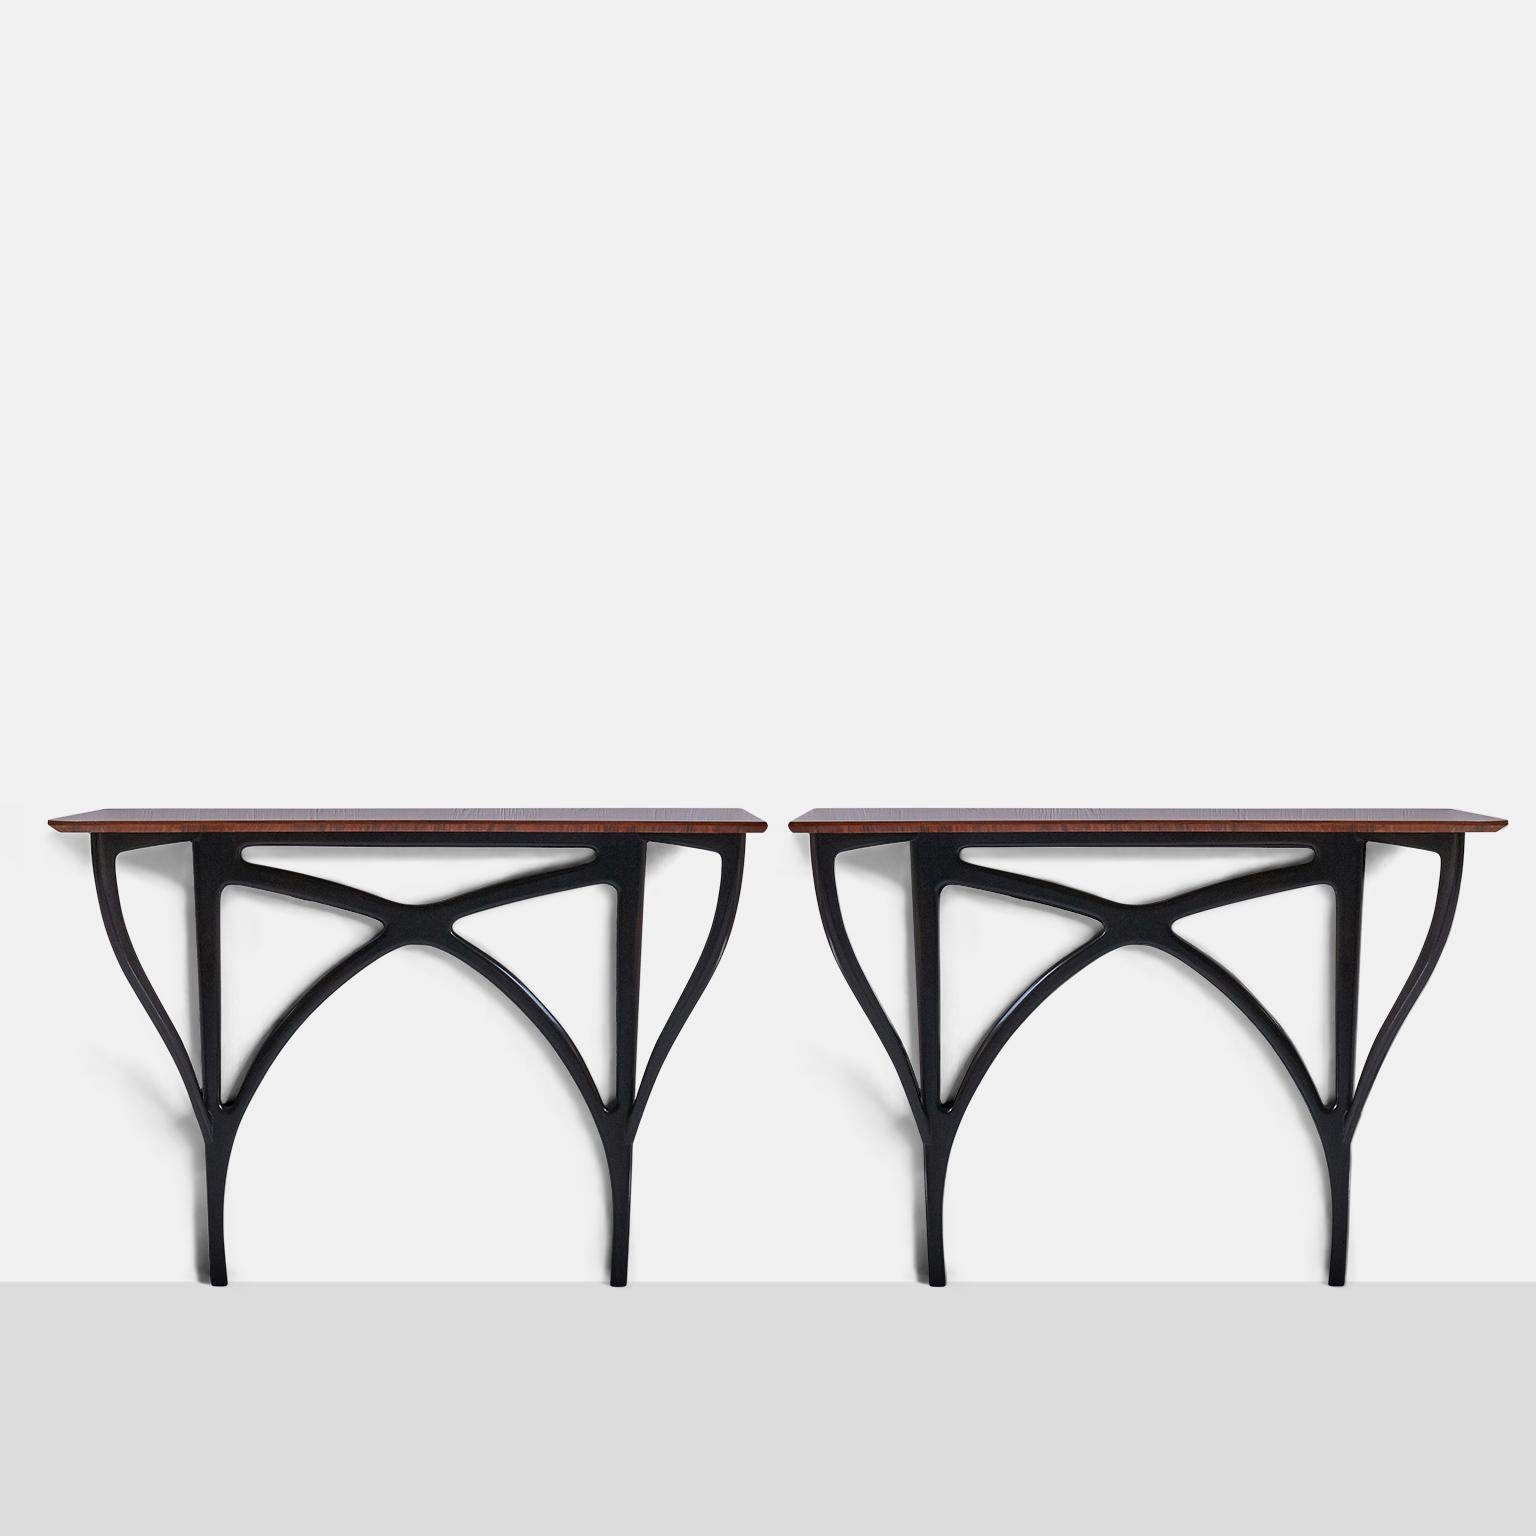 A pair of wall-mounted shelves by Ico Parisi for Arte casa, circa 1950. Made of Brazilian rosewood and an ebonized walnut base.
Italy, circa 1950
Sold and priced individually.
Provenance: Authenticated by Roberta Lietti of the Ico Parisi design